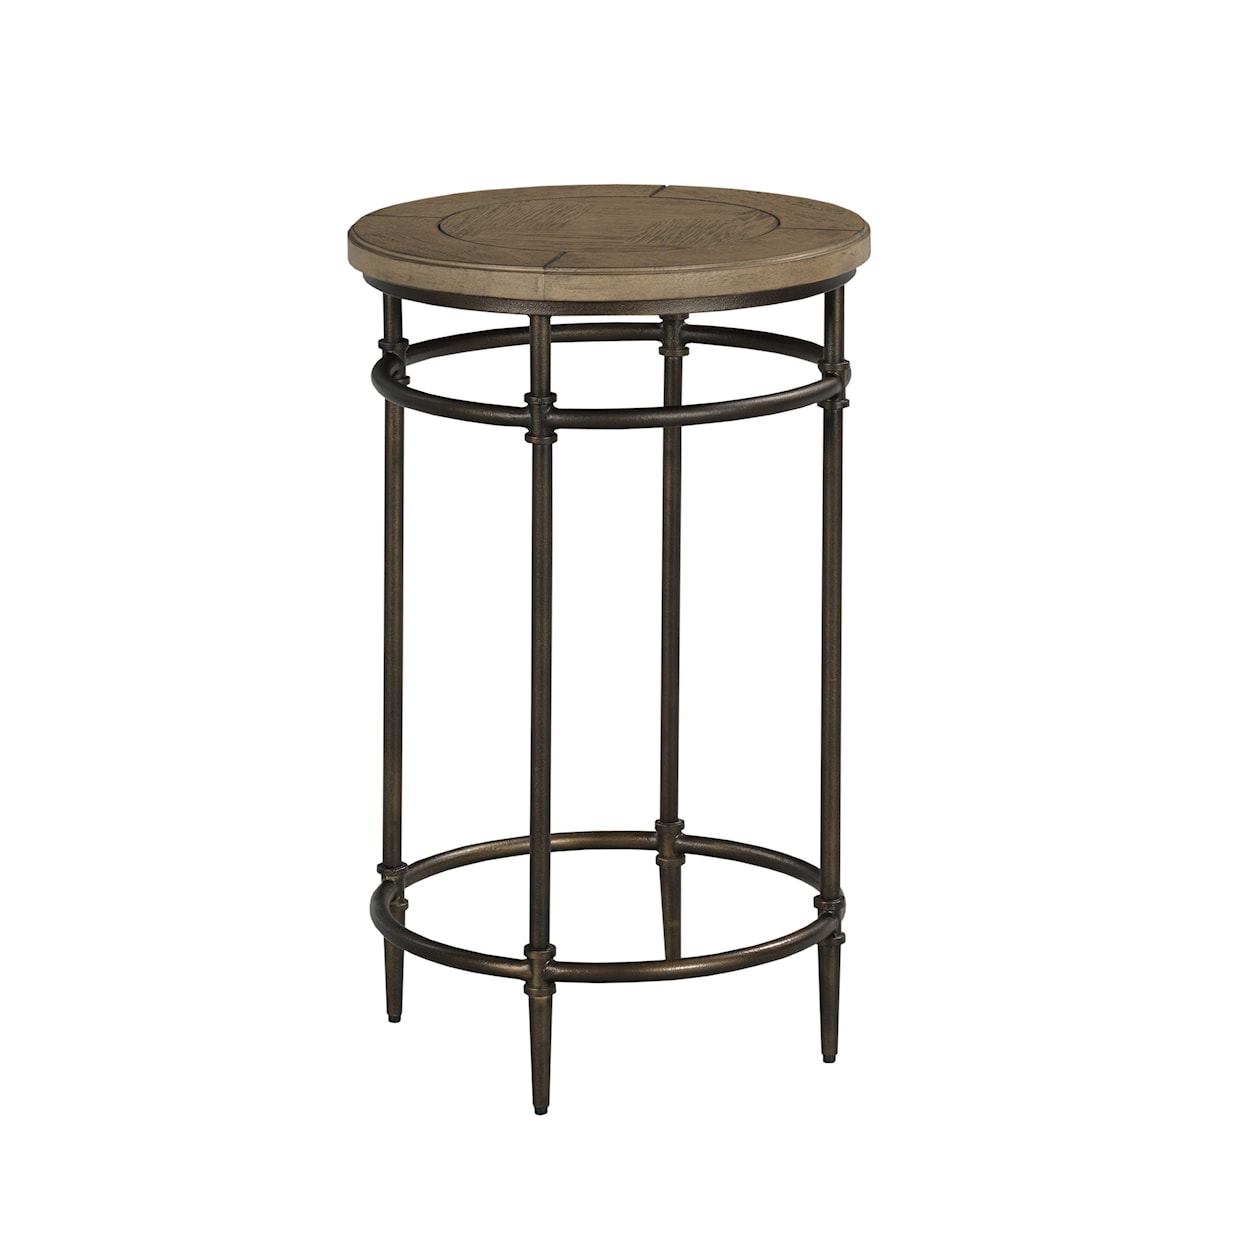 England Crossroads Round Chairside Table